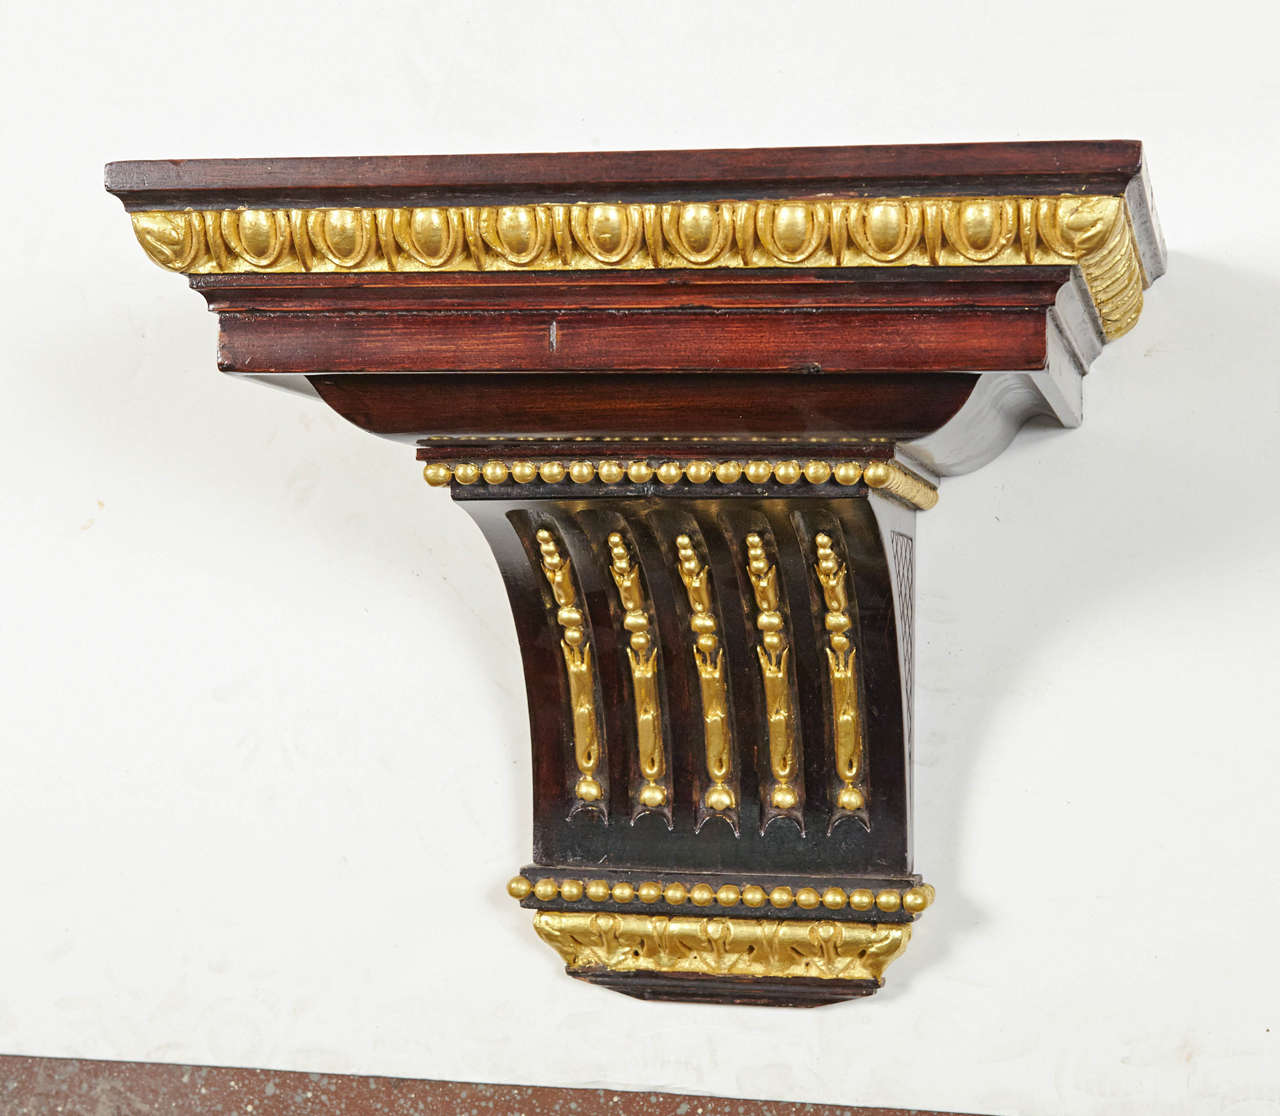 Regency-style mahogany stained wall bracket with gilded gadroon edge detail on stacked shelf, gilded bellflowers and beading.